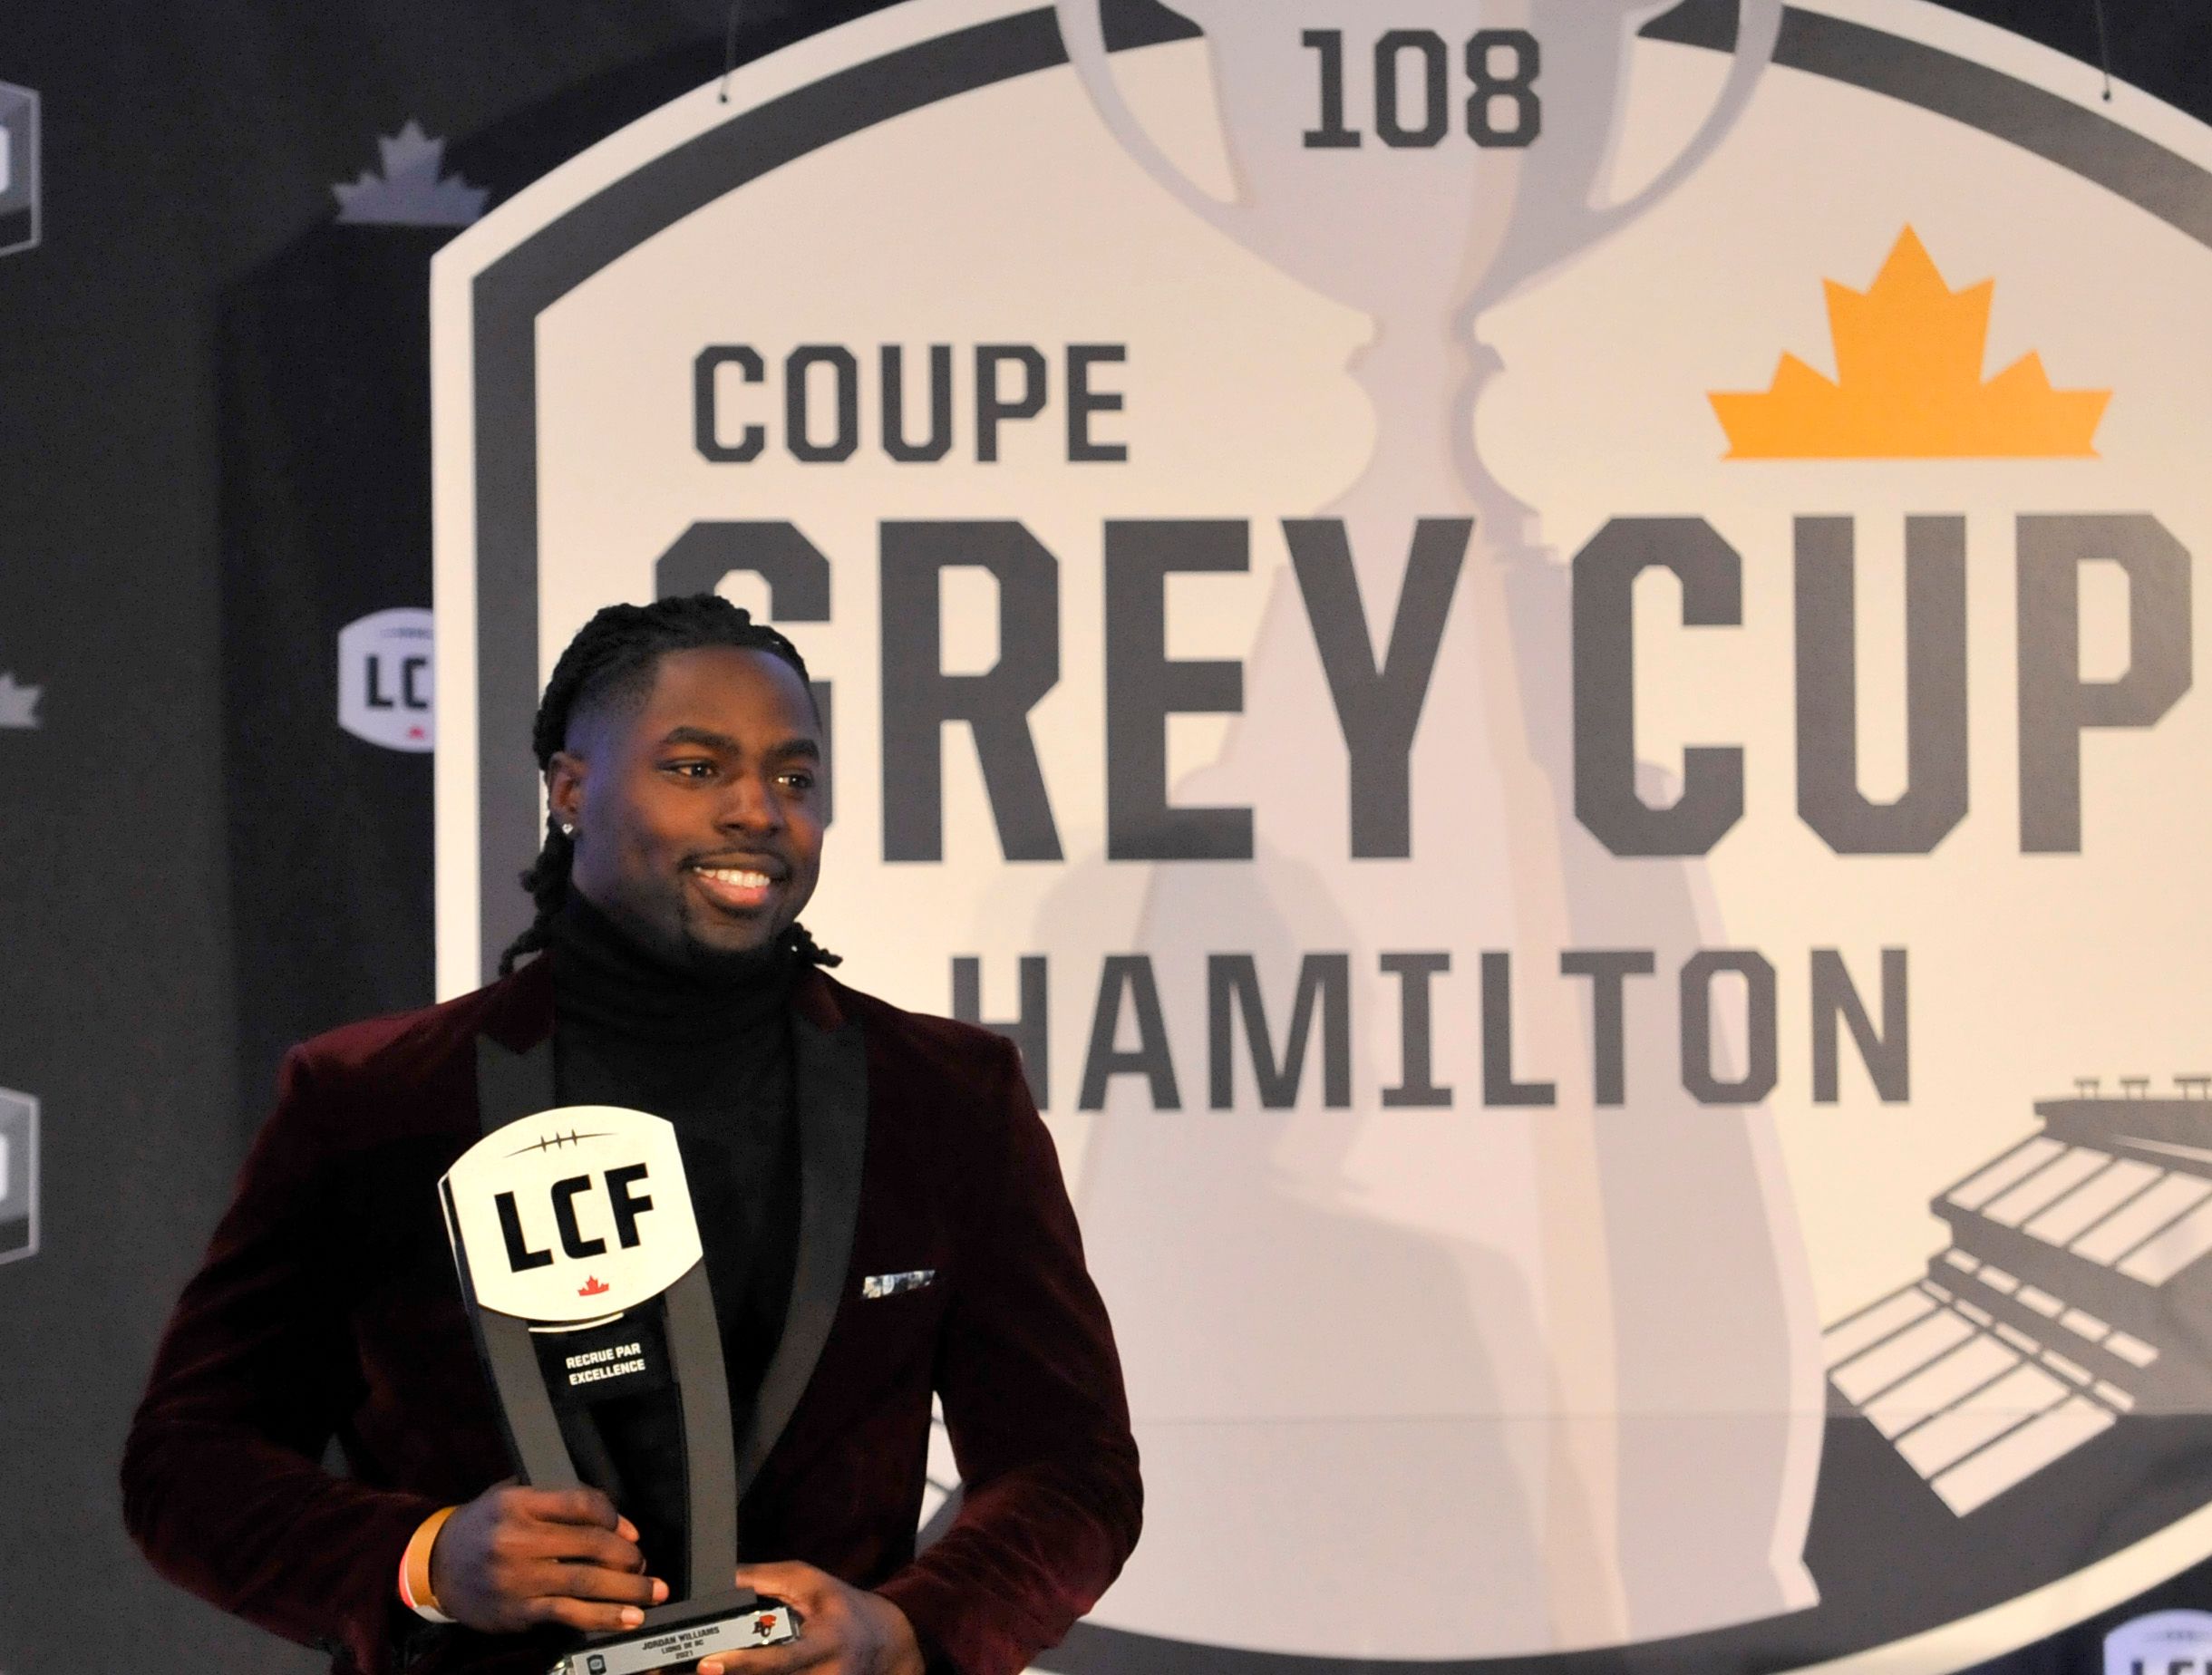 Jordan Williams endured a windy, sometimes unpredictable path to the CFL Most Outstanding Rookie award. The linebacker takes influence from his mother.